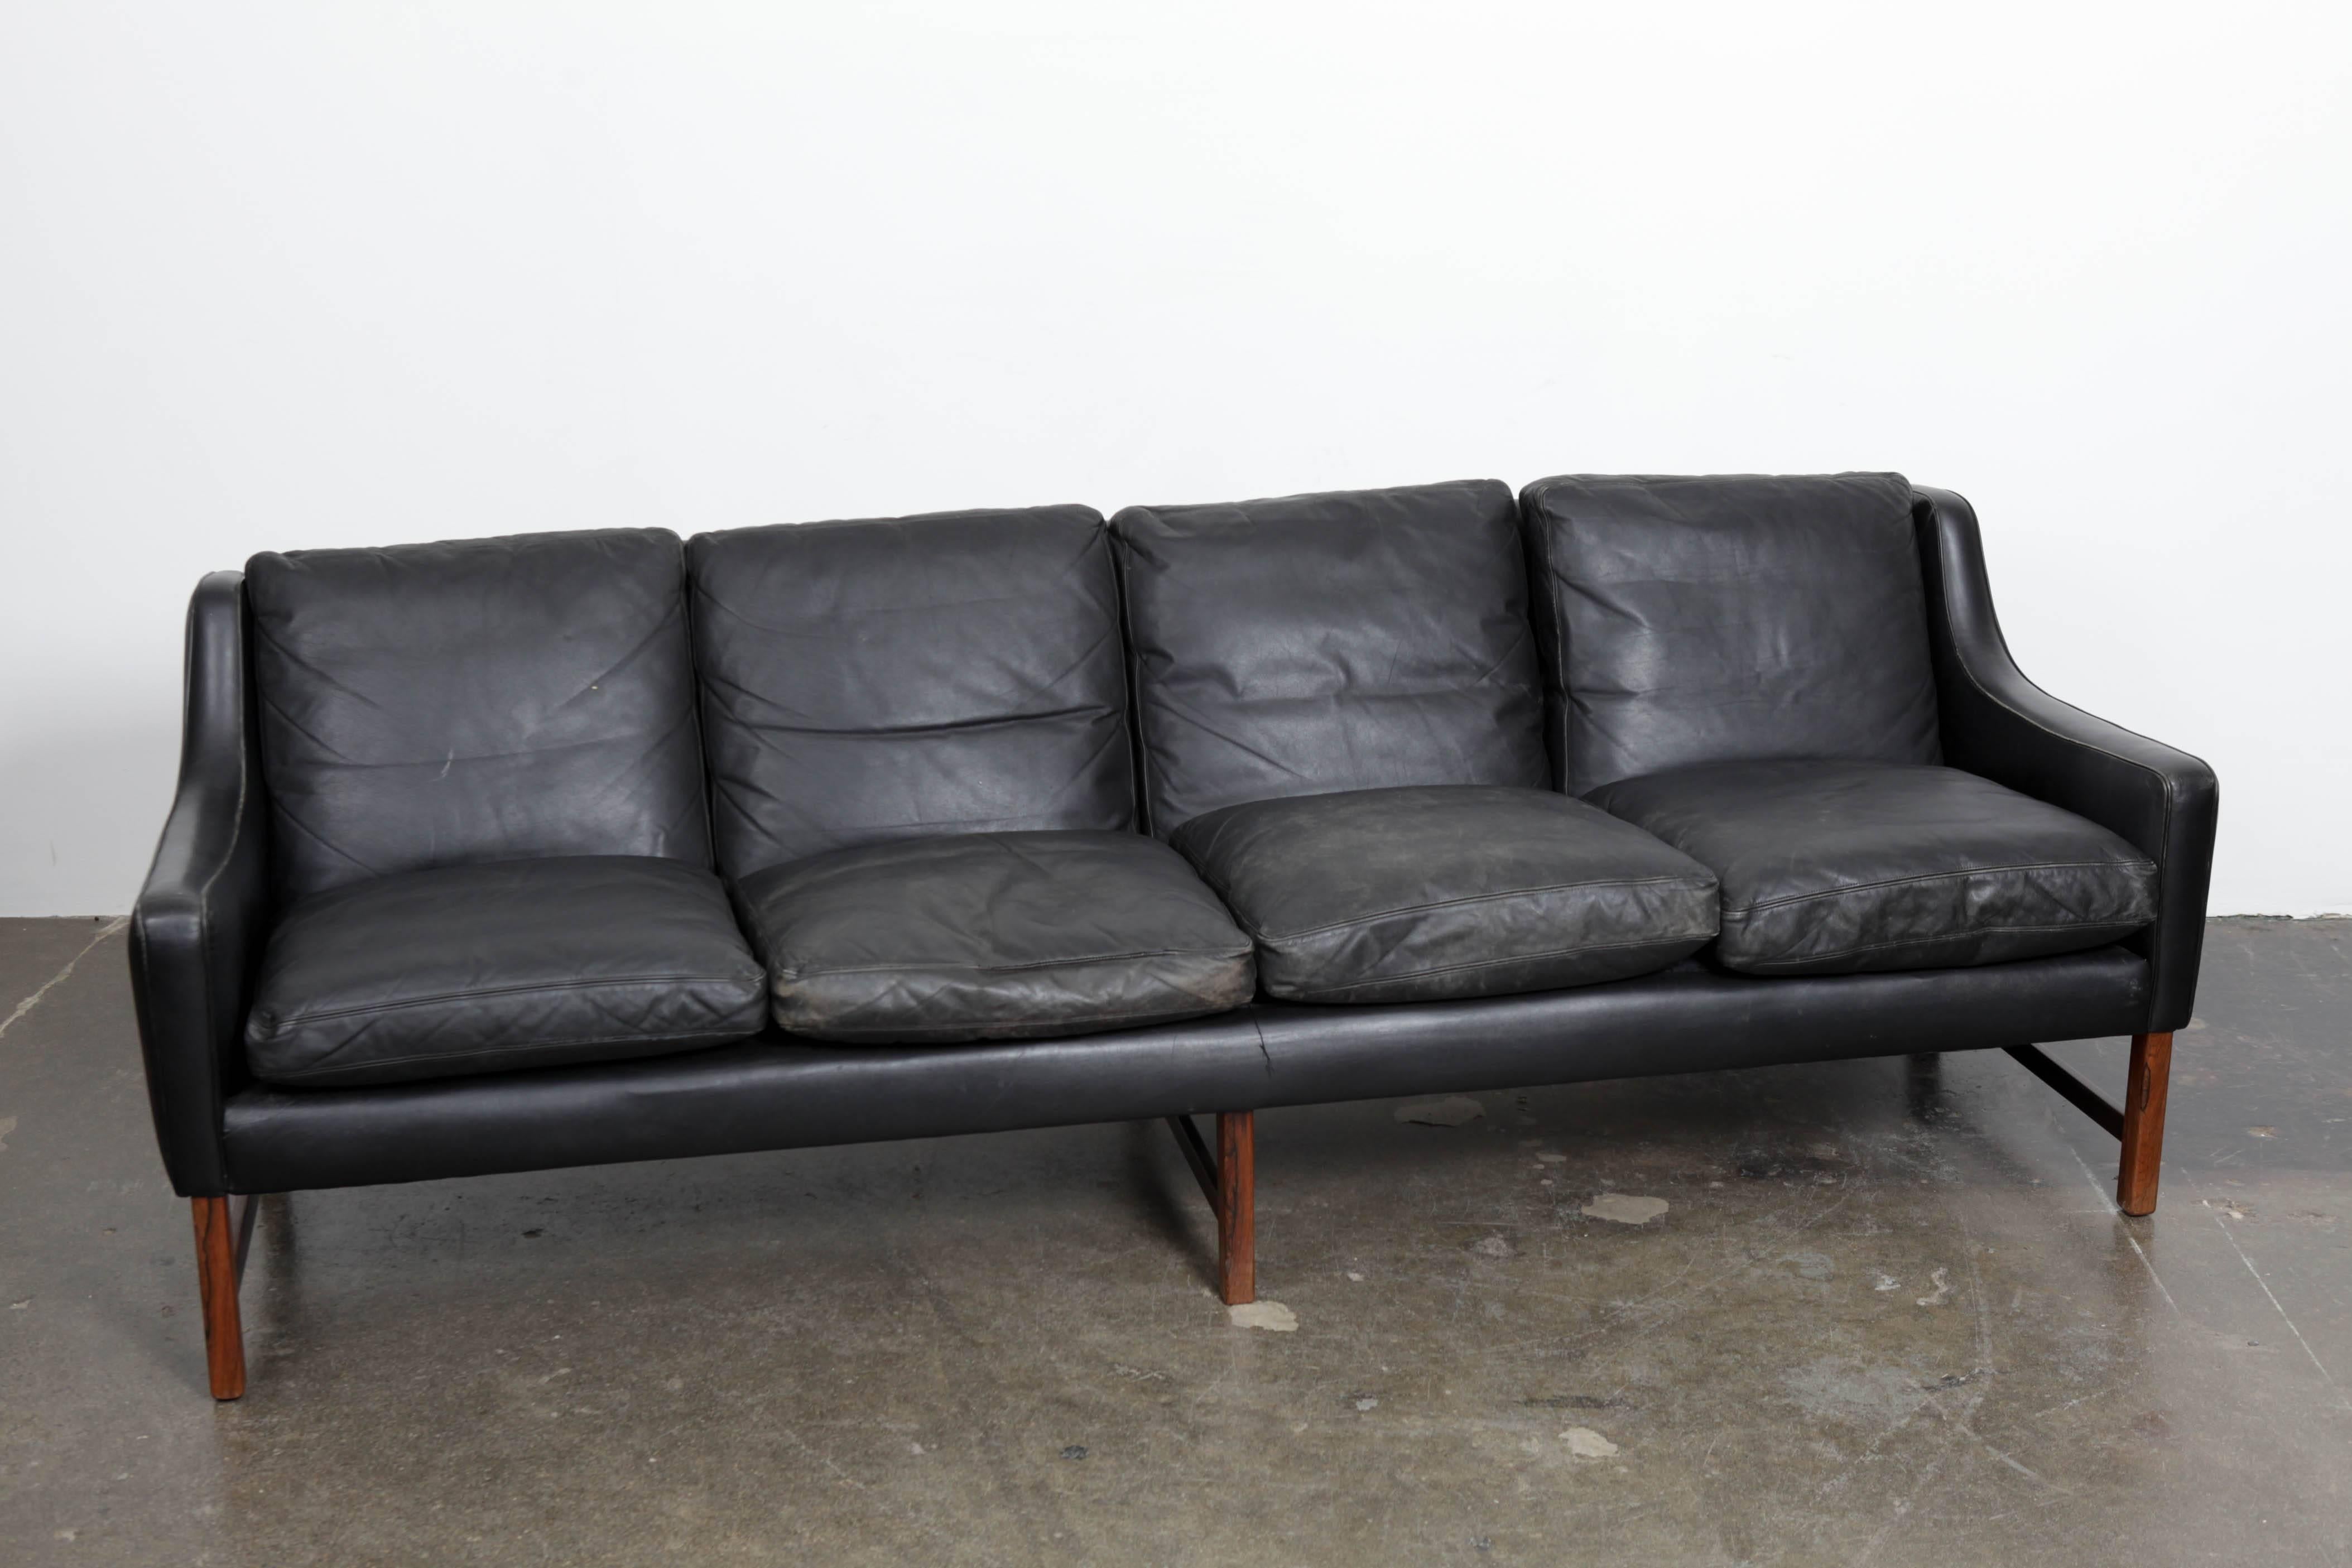 Norwegian four-seat sofa by Fredrik Kayser, in original black leather with rosewood legs. It shows some patina, but in a positive way, no damage or tears or issues at all.